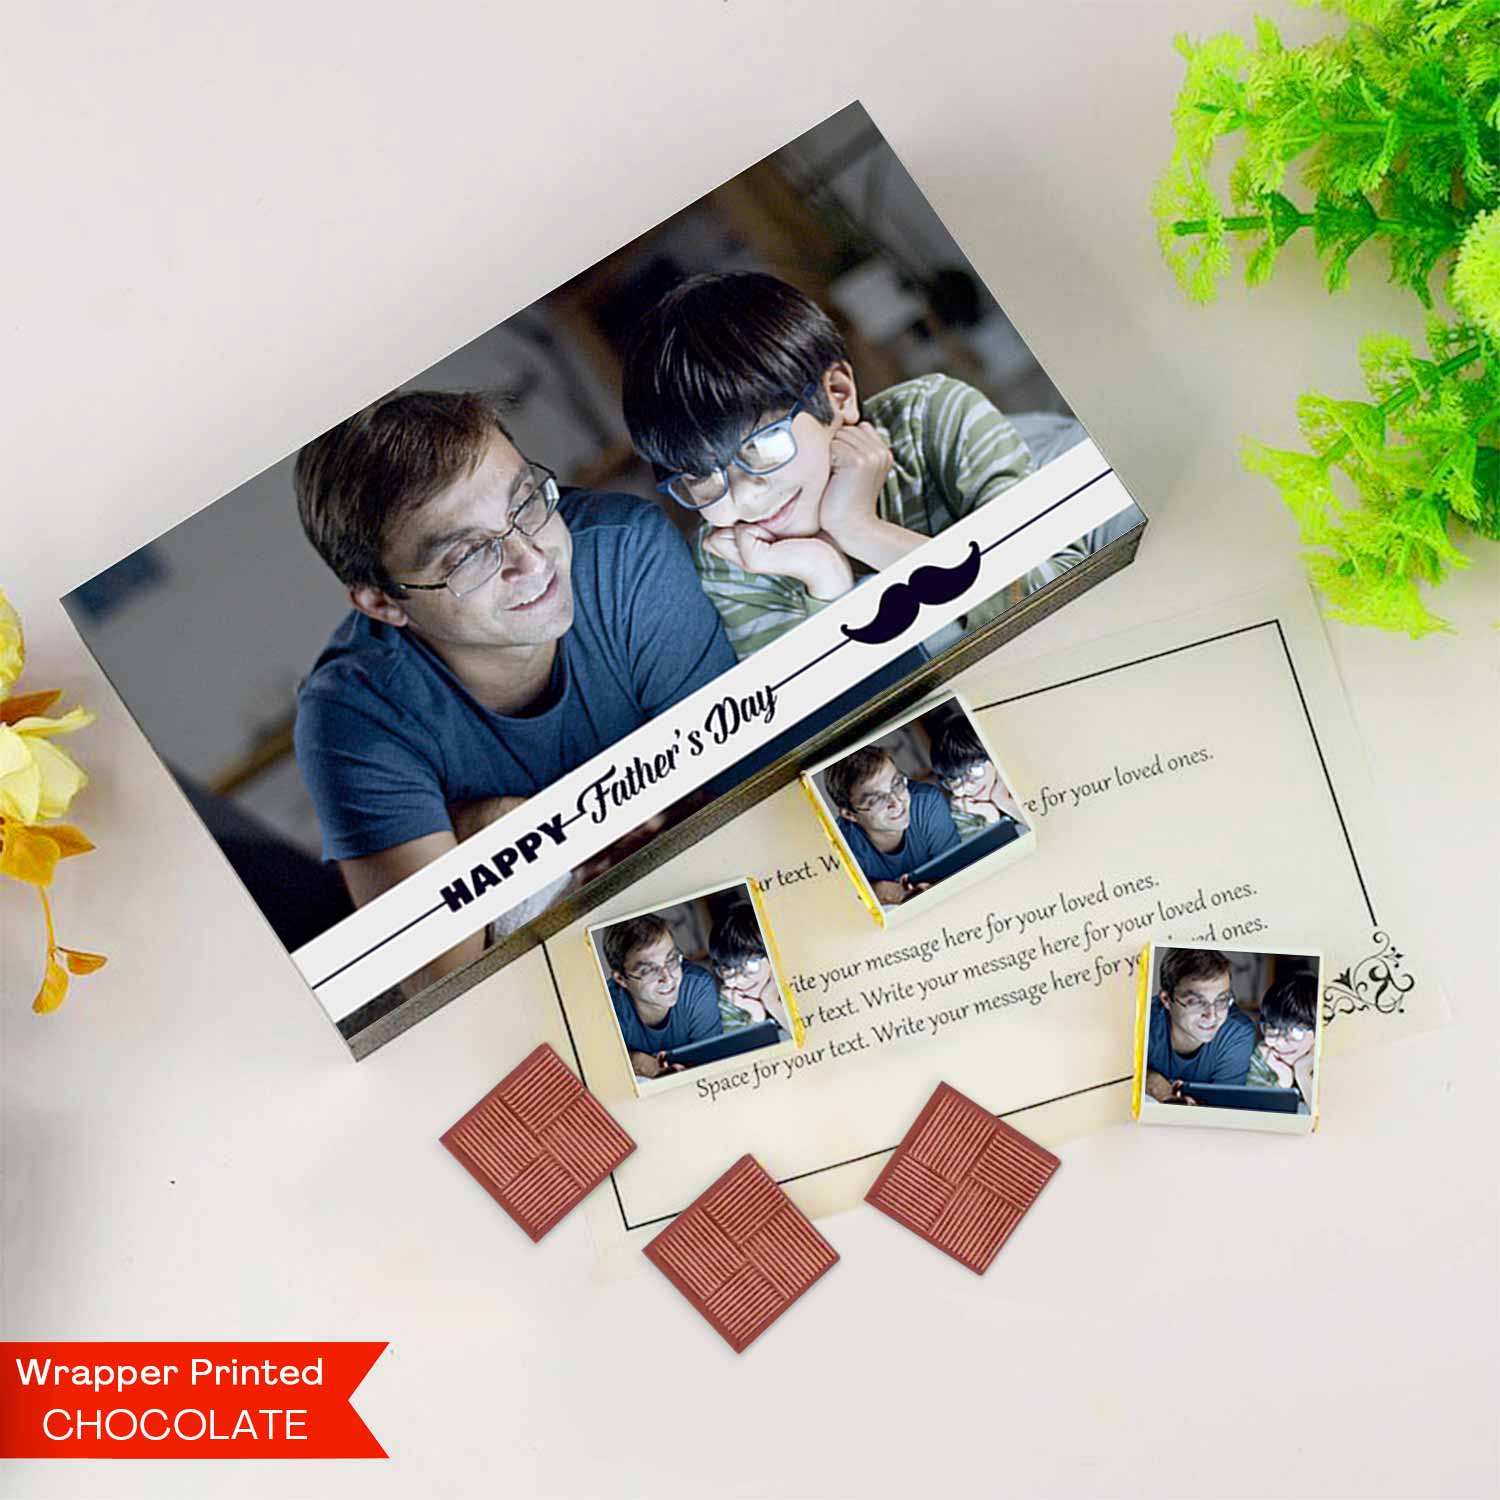 Happy father's day printed wrapped Chocolates Designer black box